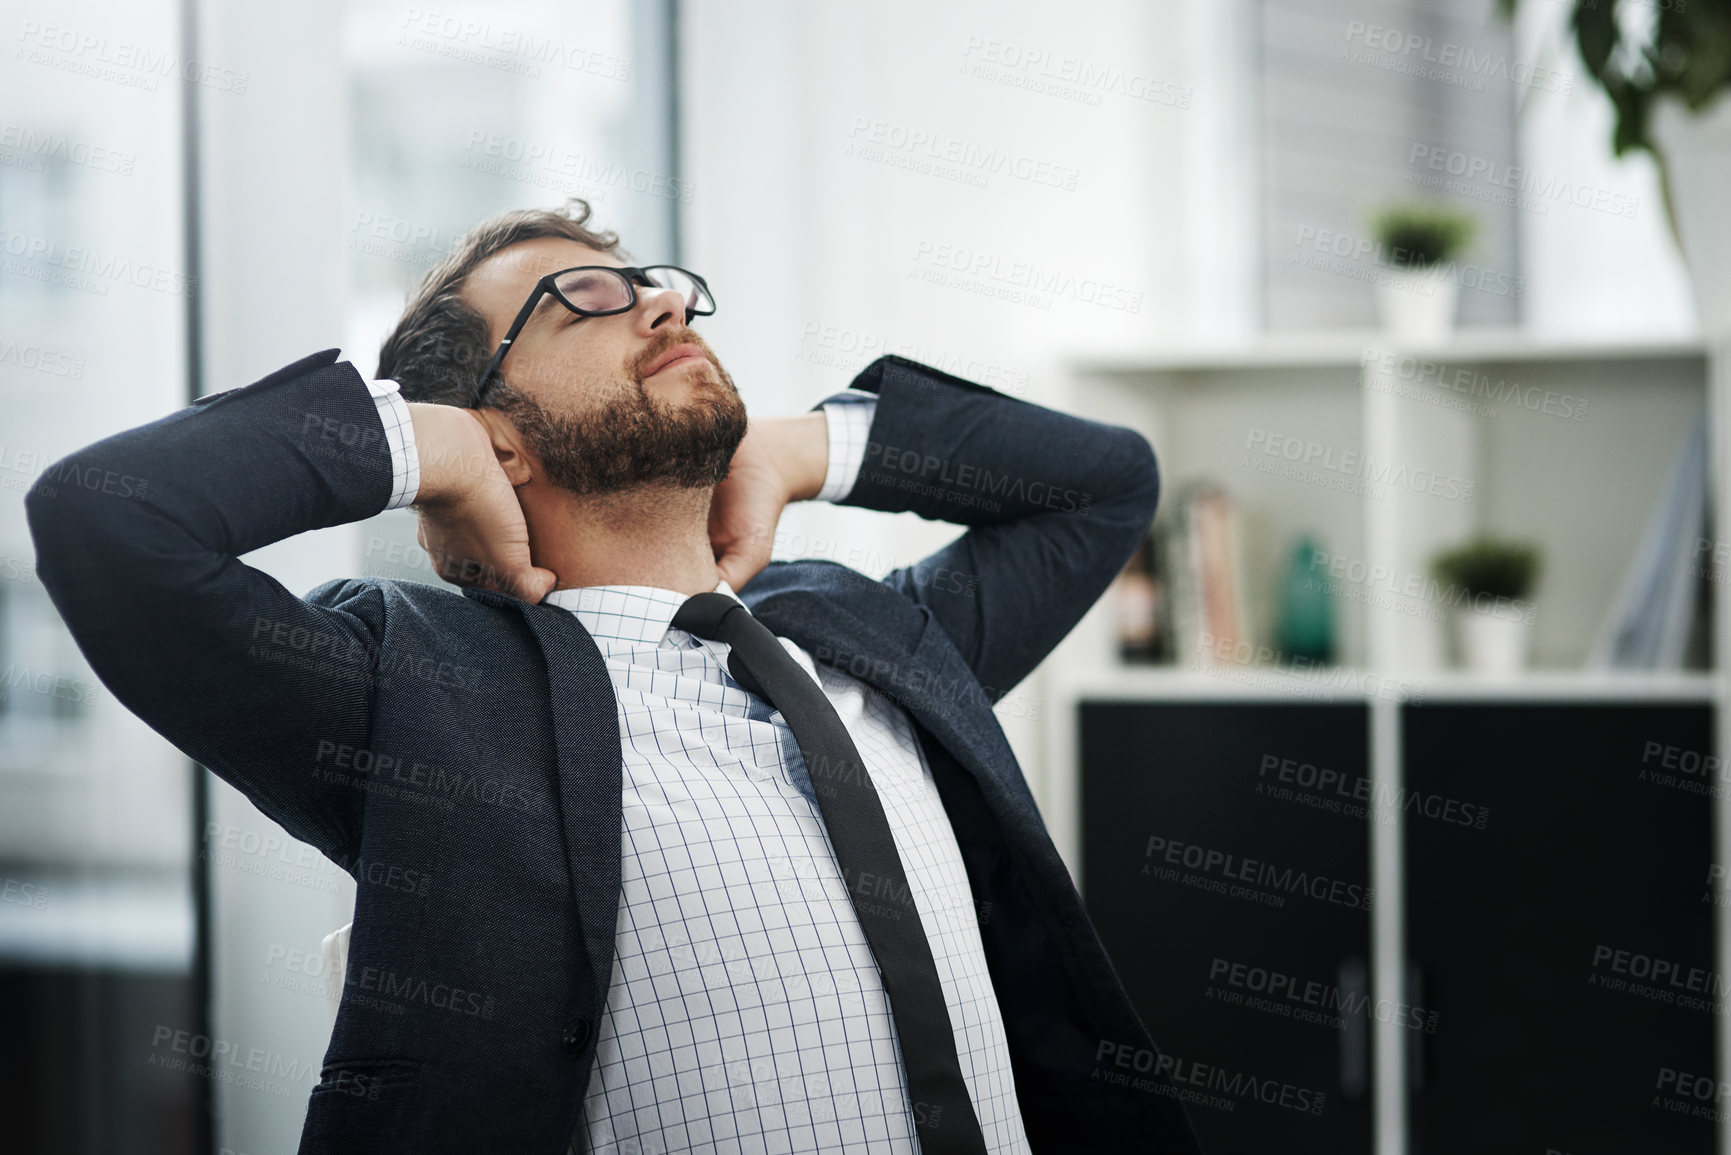 Buy stock photo Shot of a young businessman taking a break in an office